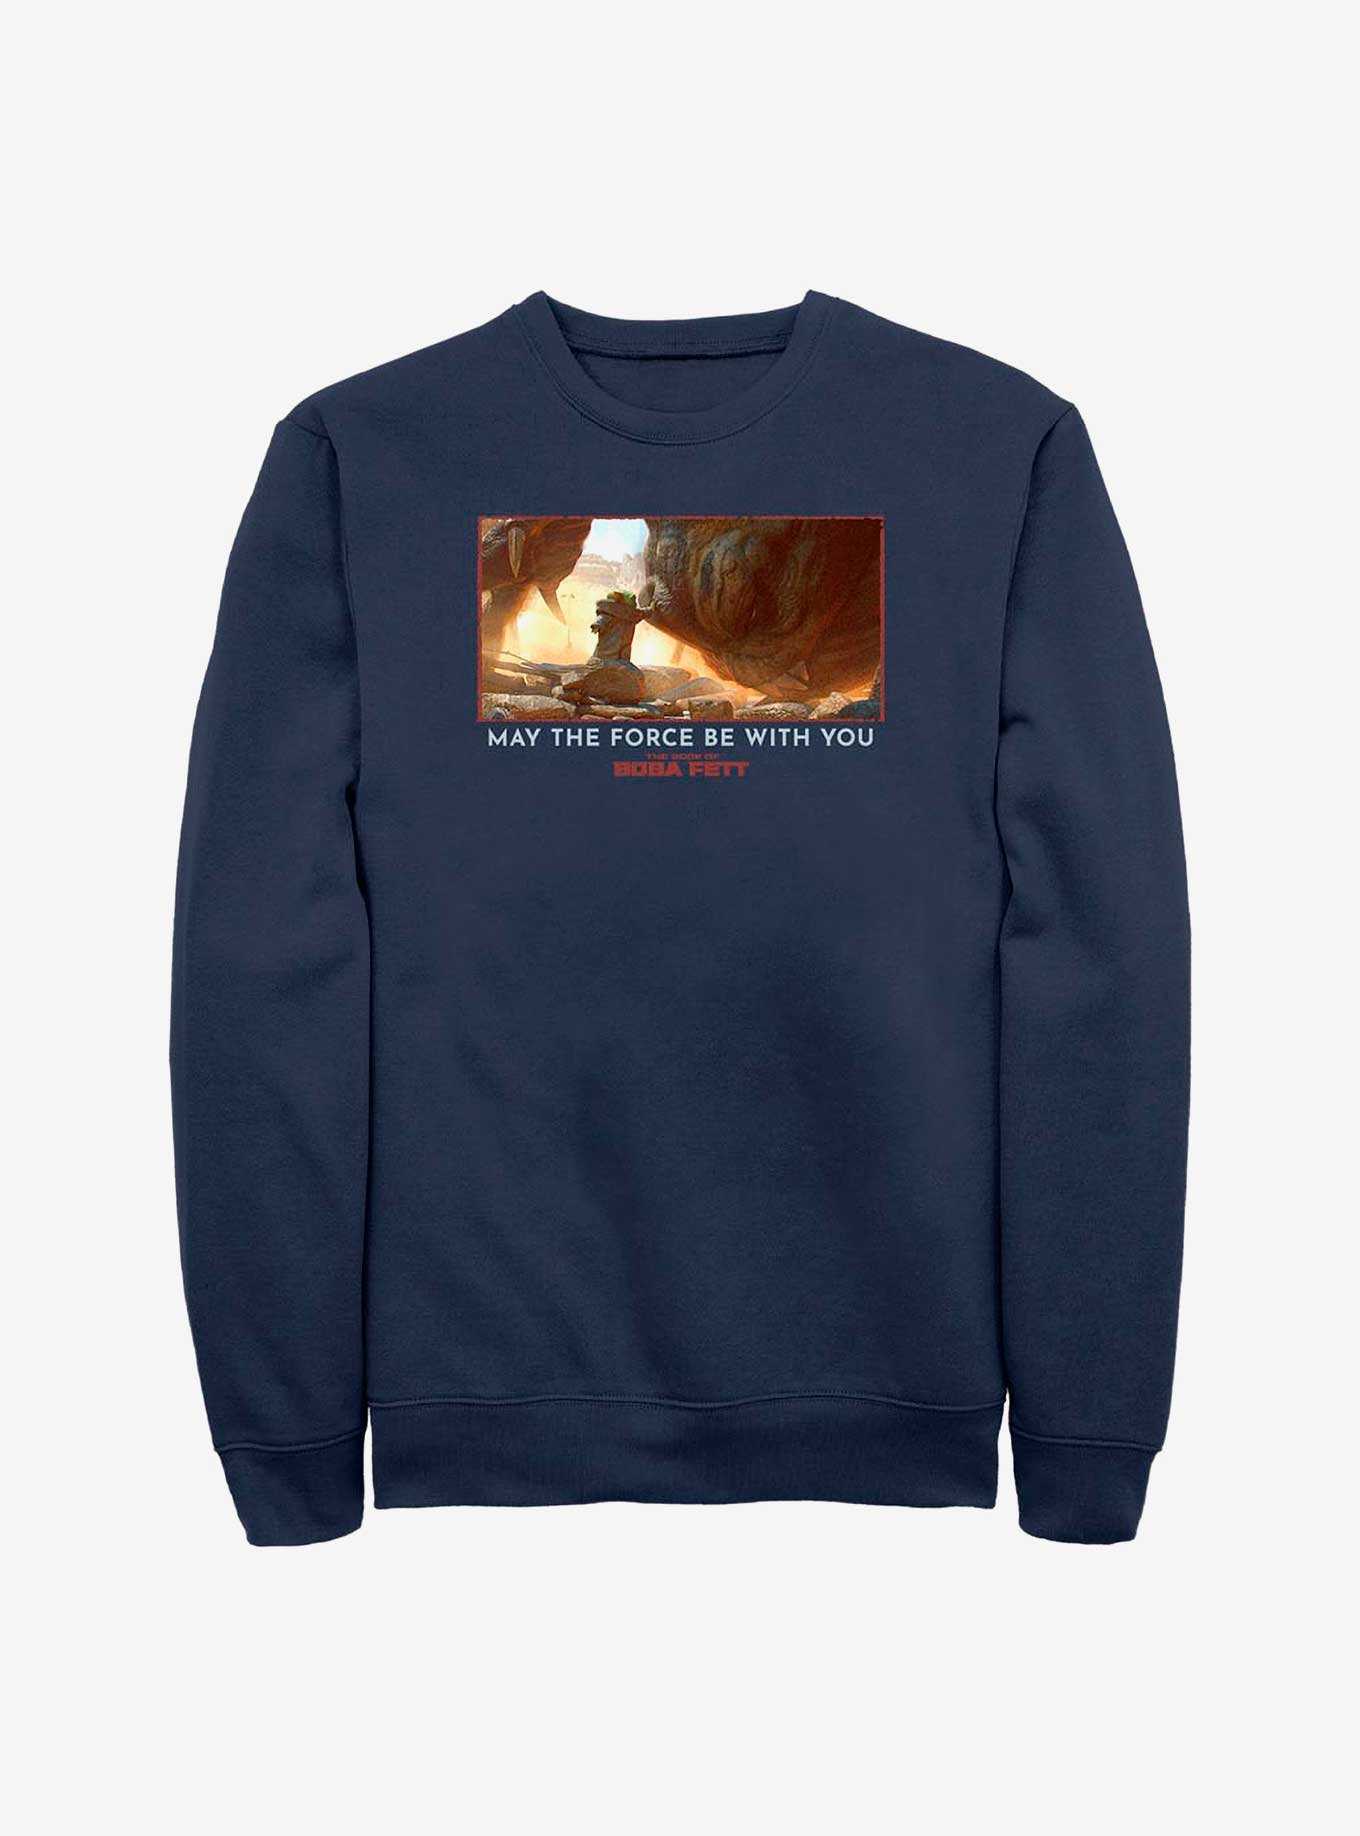 Star Wars Book Of Boba Fett The Child & Rancor May The Force Be With You Sweatshirt, , hi-res